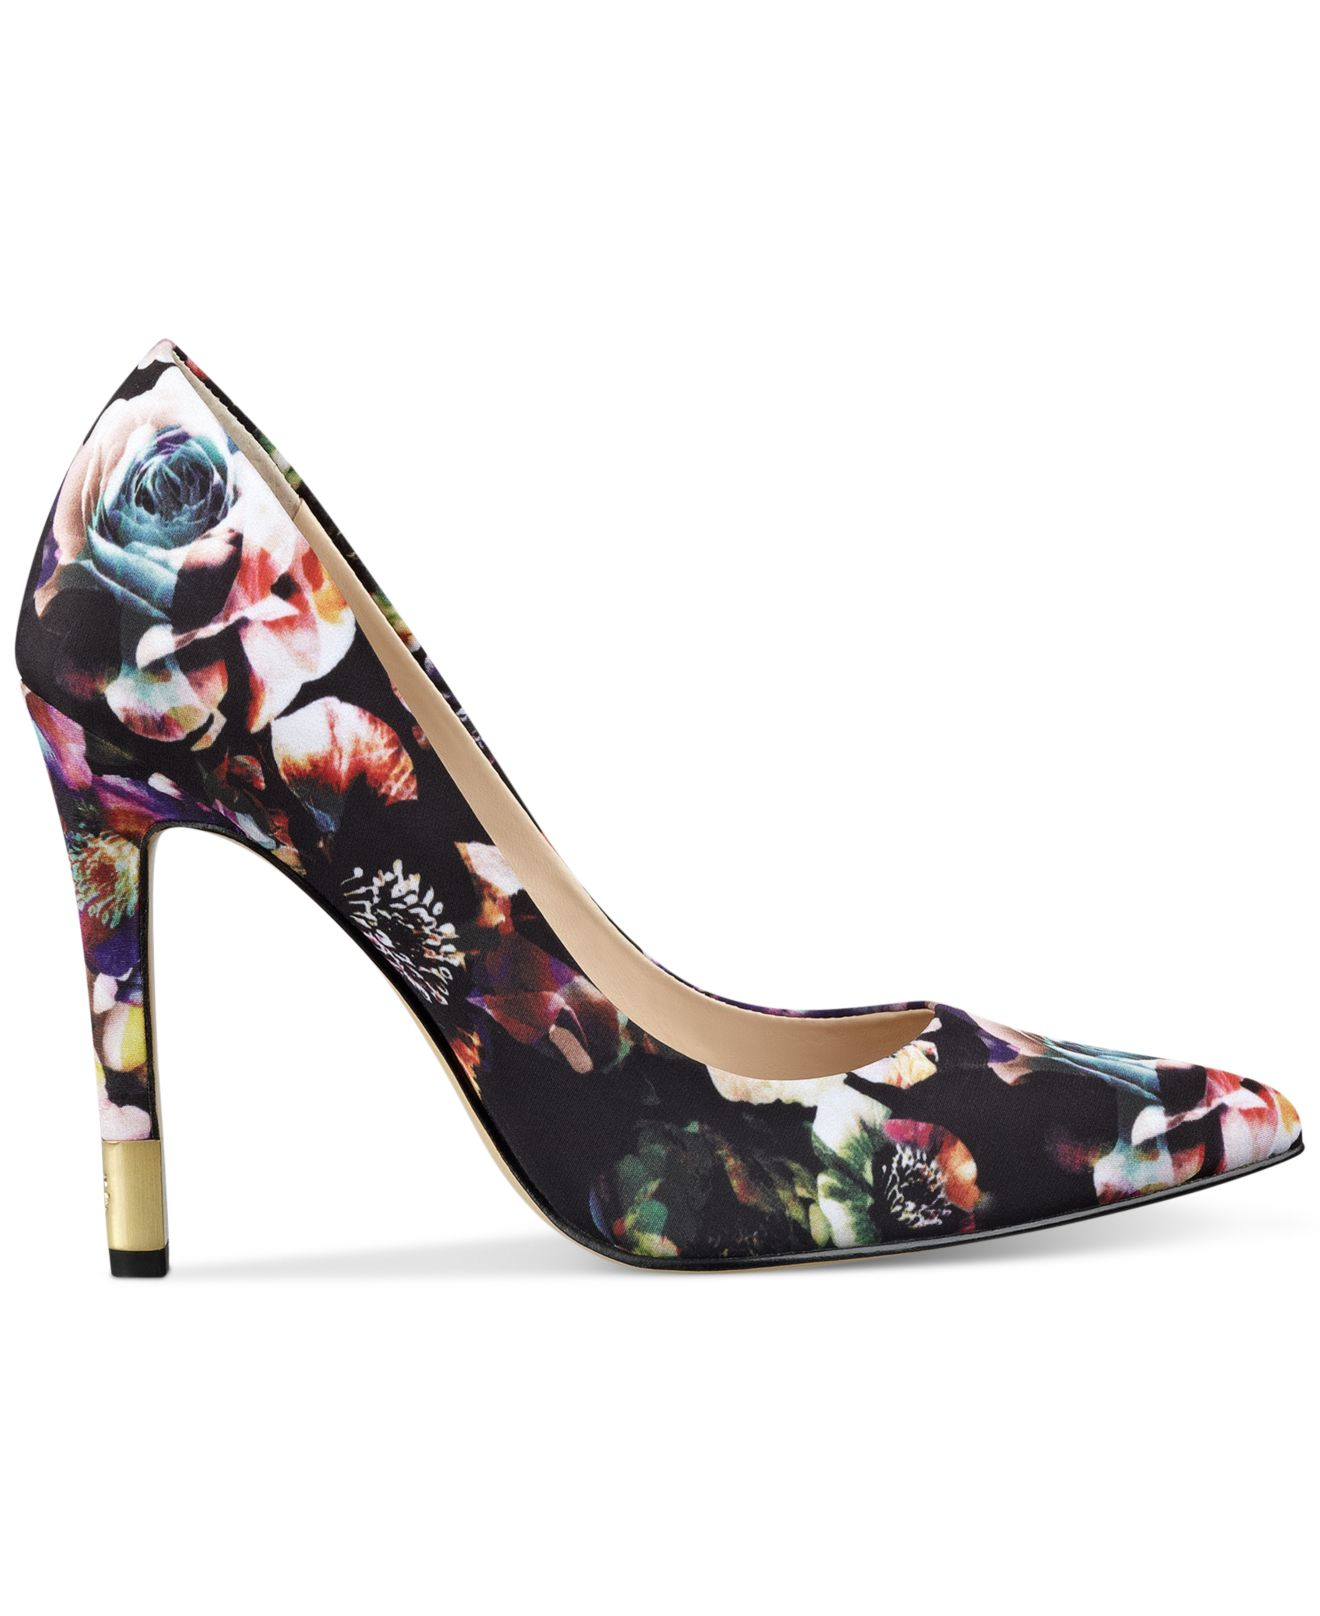 Guess Babbitta Pointed-toe Floral-print Pumps in Black Floral (Black) | Lyst